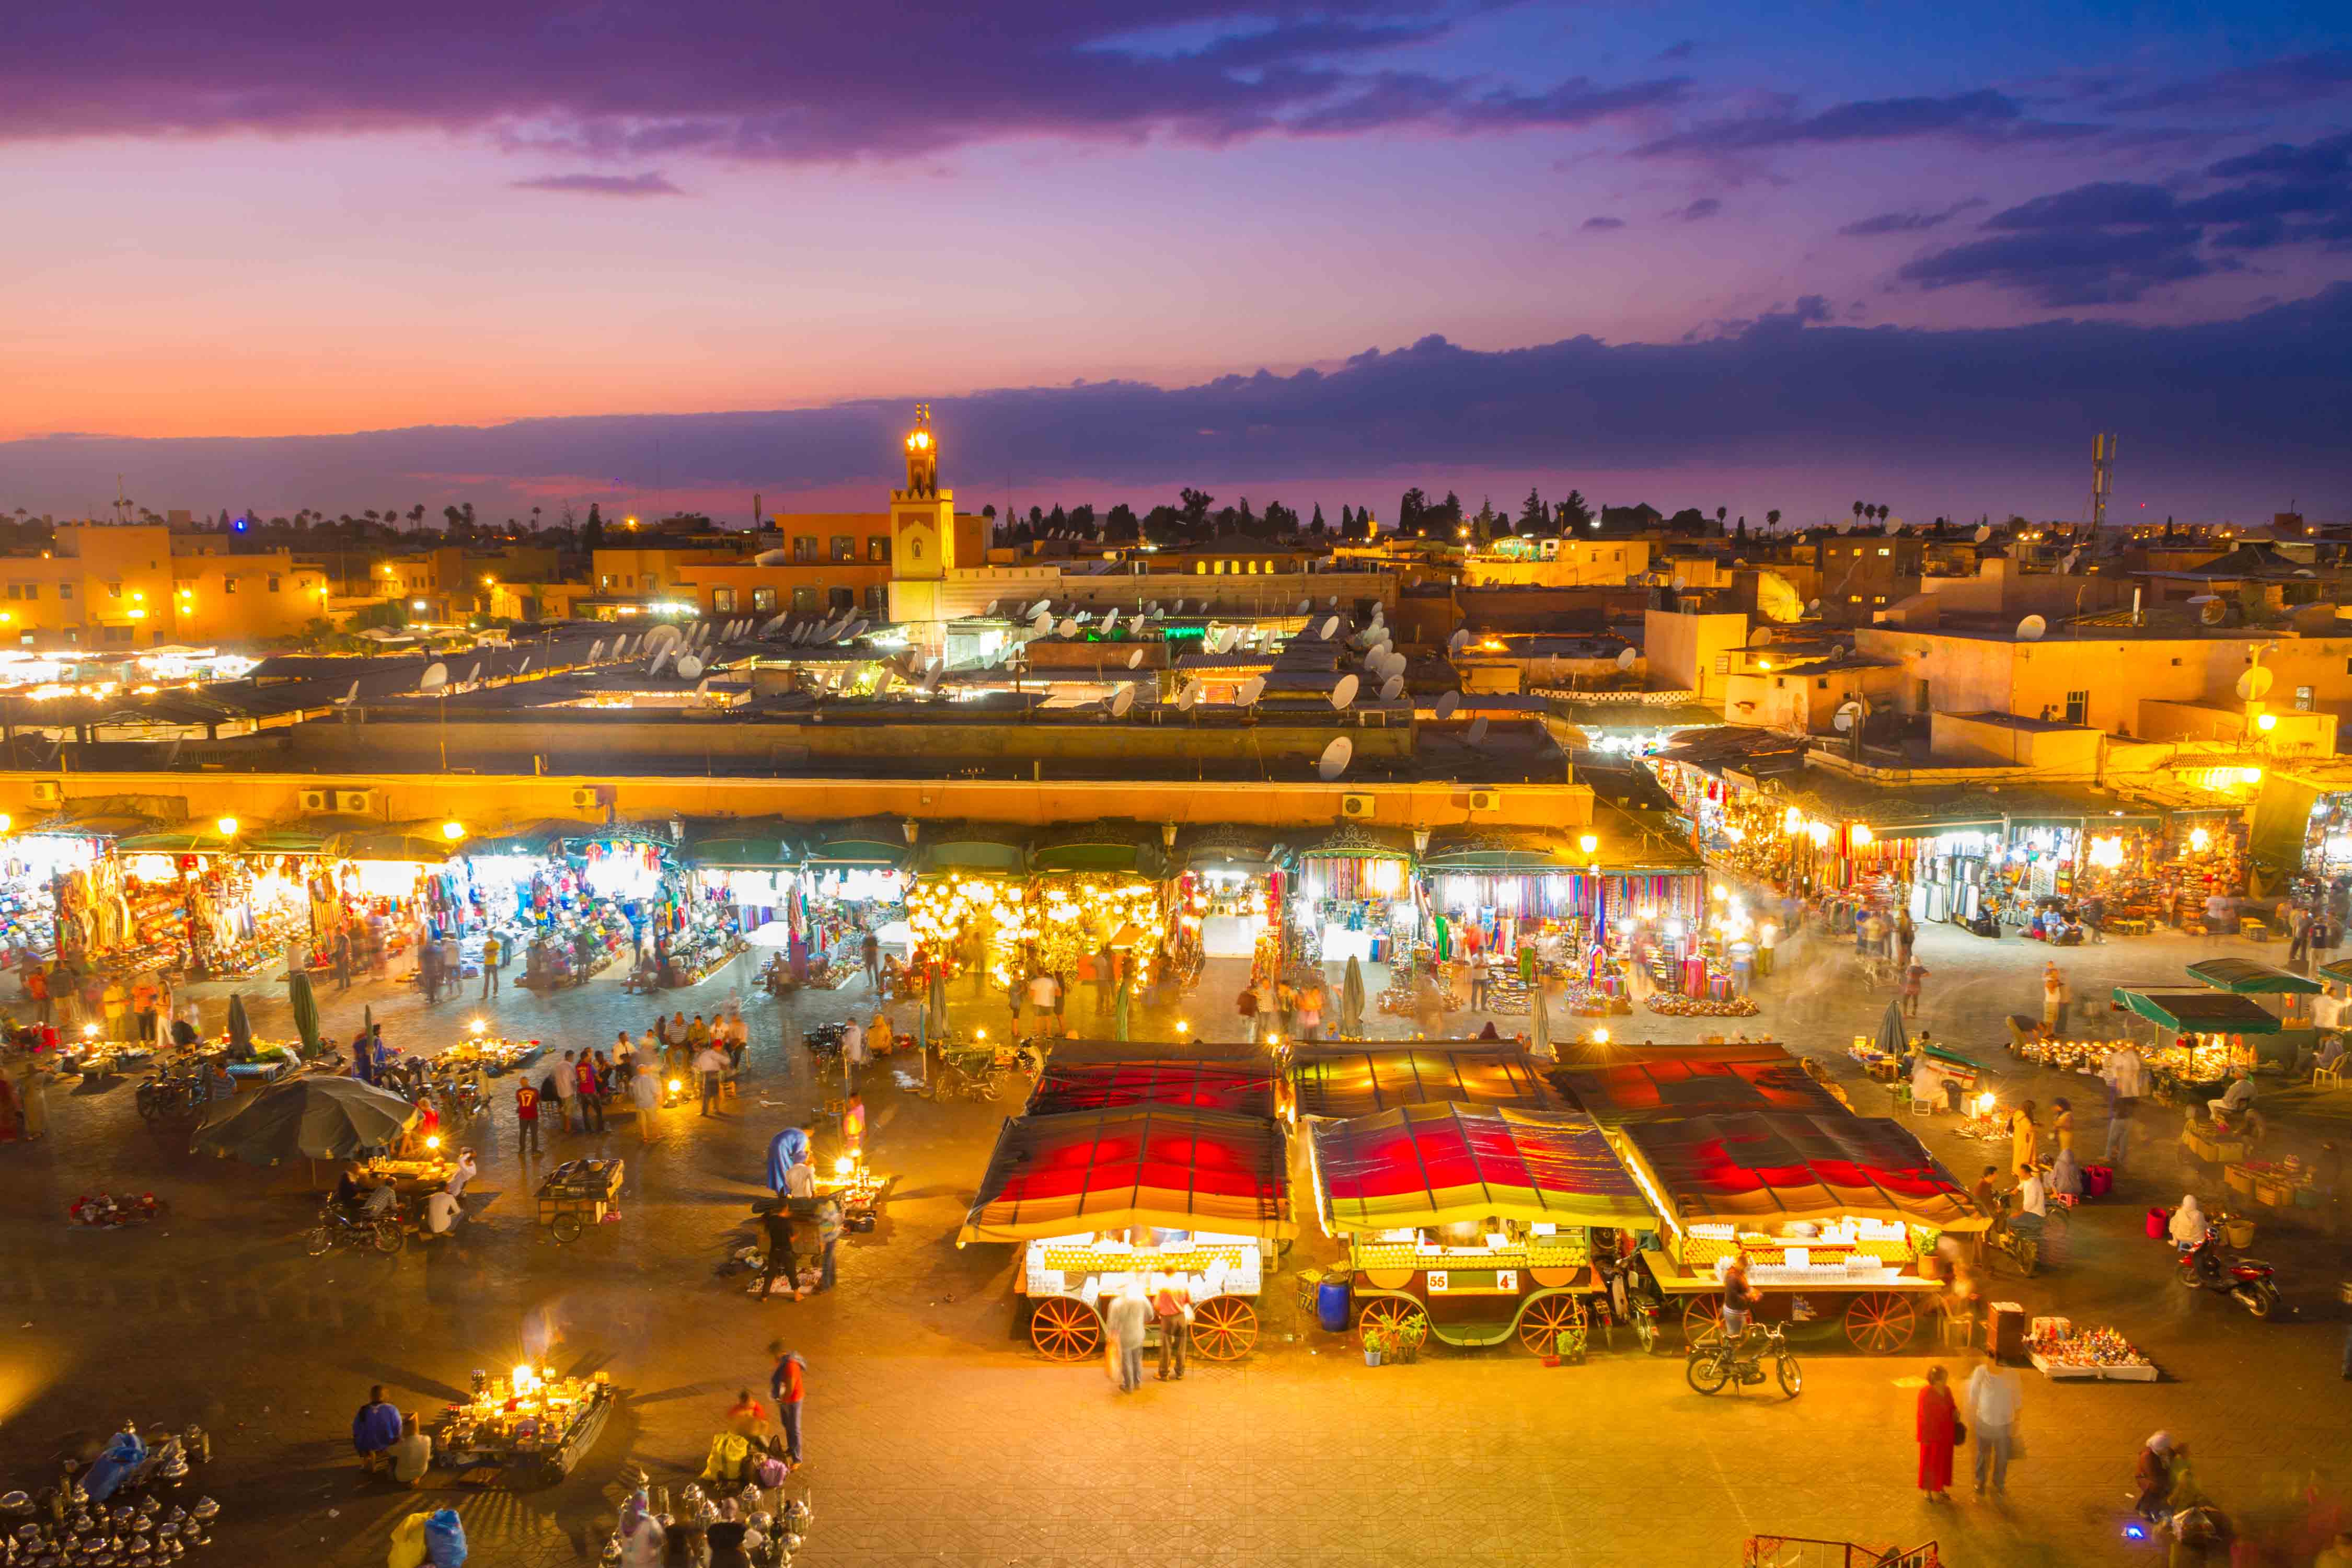 Top 5 cities to visit in North Africa in 2019